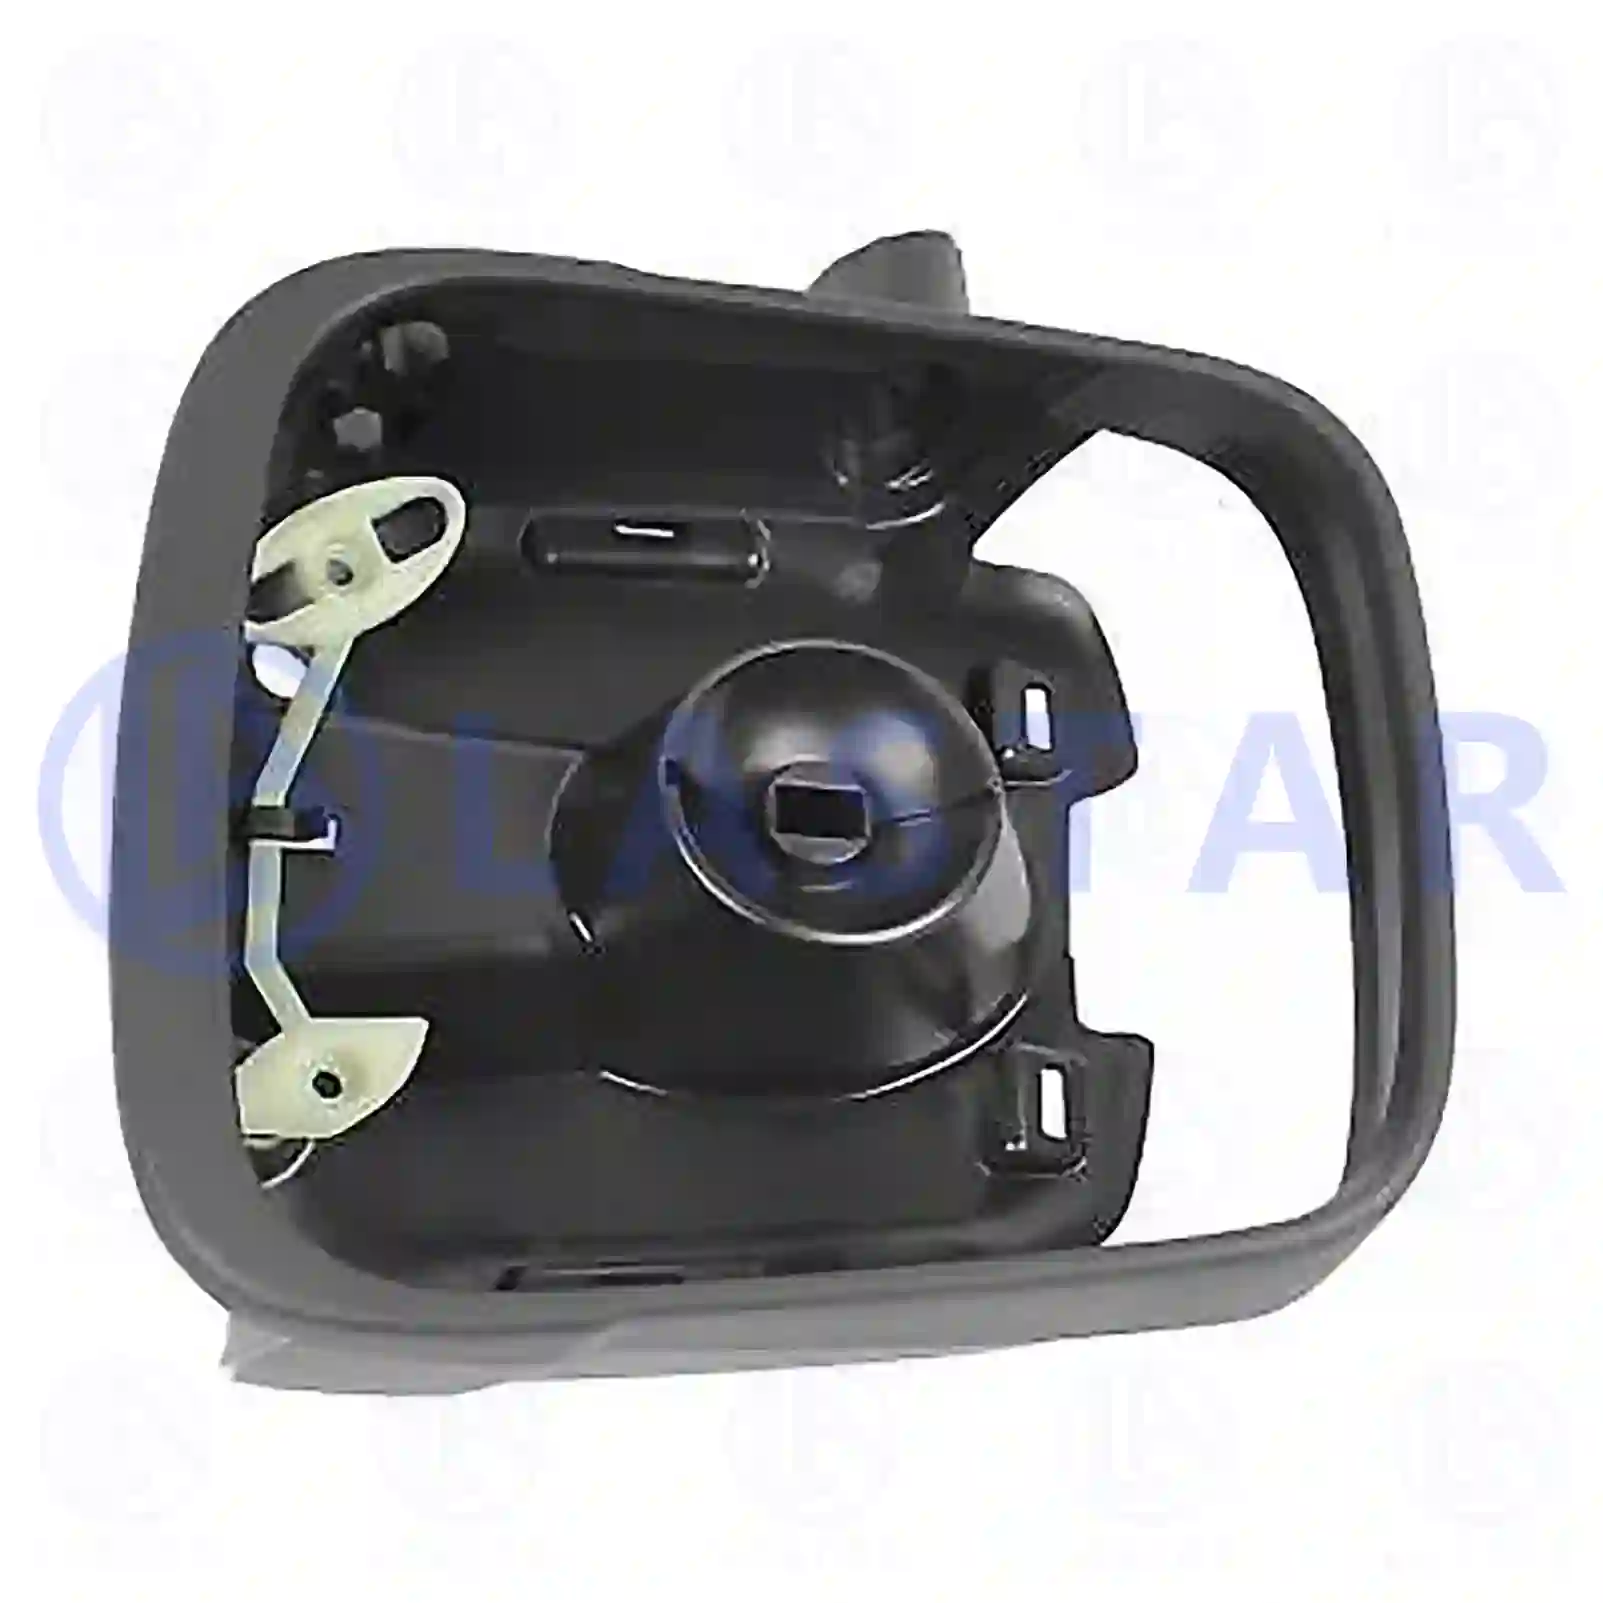 Mirror bracket, wide view mirror, right, 77721233, 20589817 ||  77721233 Lastar Spare Part | Truck Spare Parts, Auotomotive Spare Parts Mirror bracket, wide view mirror, right, 77721233, 20589817 ||  77721233 Lastar Spare Part | Truck Spare Parts, Auotomotive Spare Parts